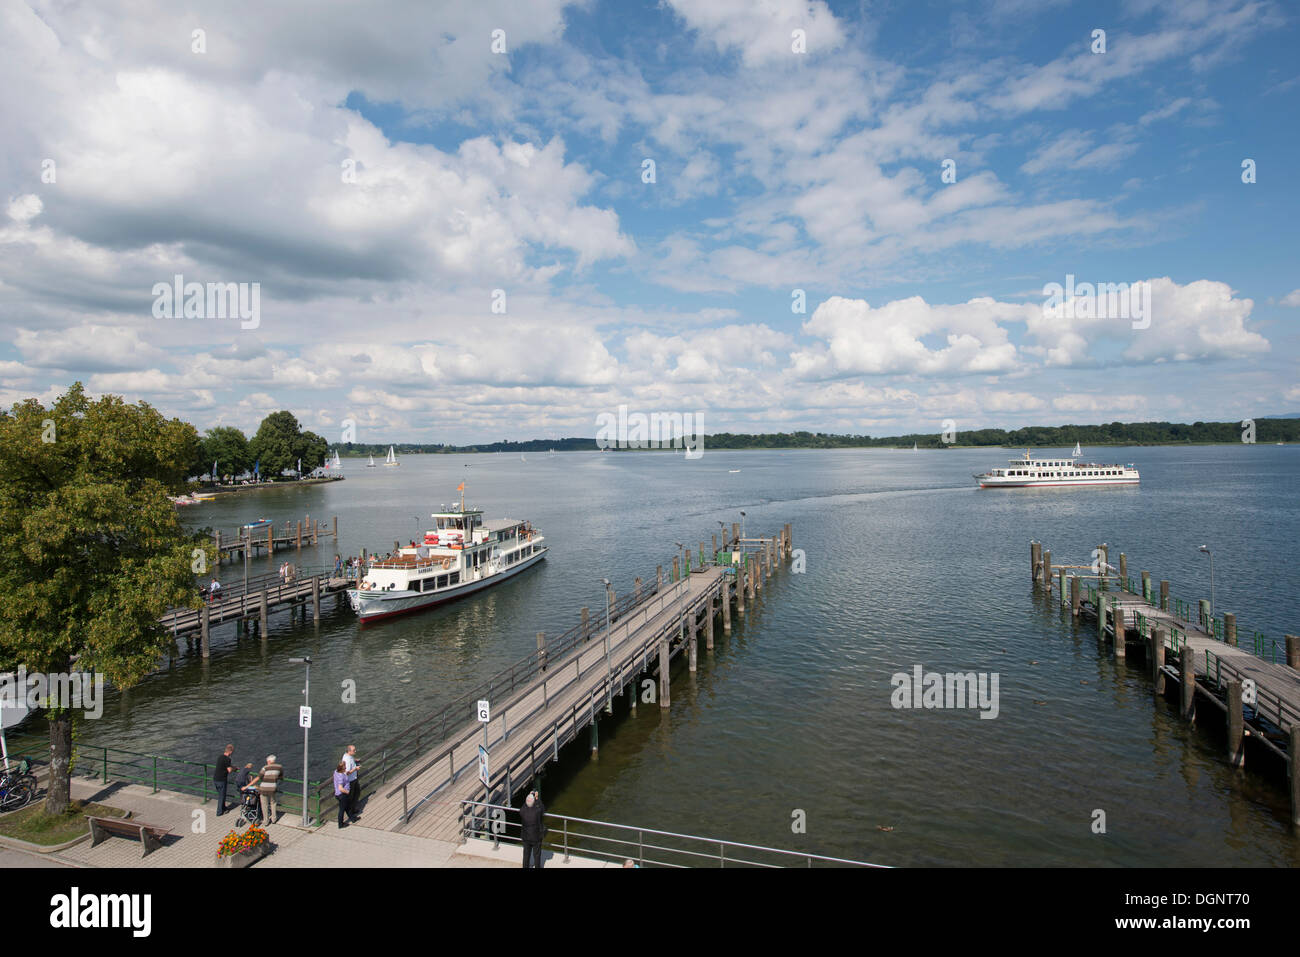 A steamboat at a landing stage on lake Chiemsee, Insel Herrenchiemsee, Prien am Chiemsee, Bavaria, Germany Stock Photo